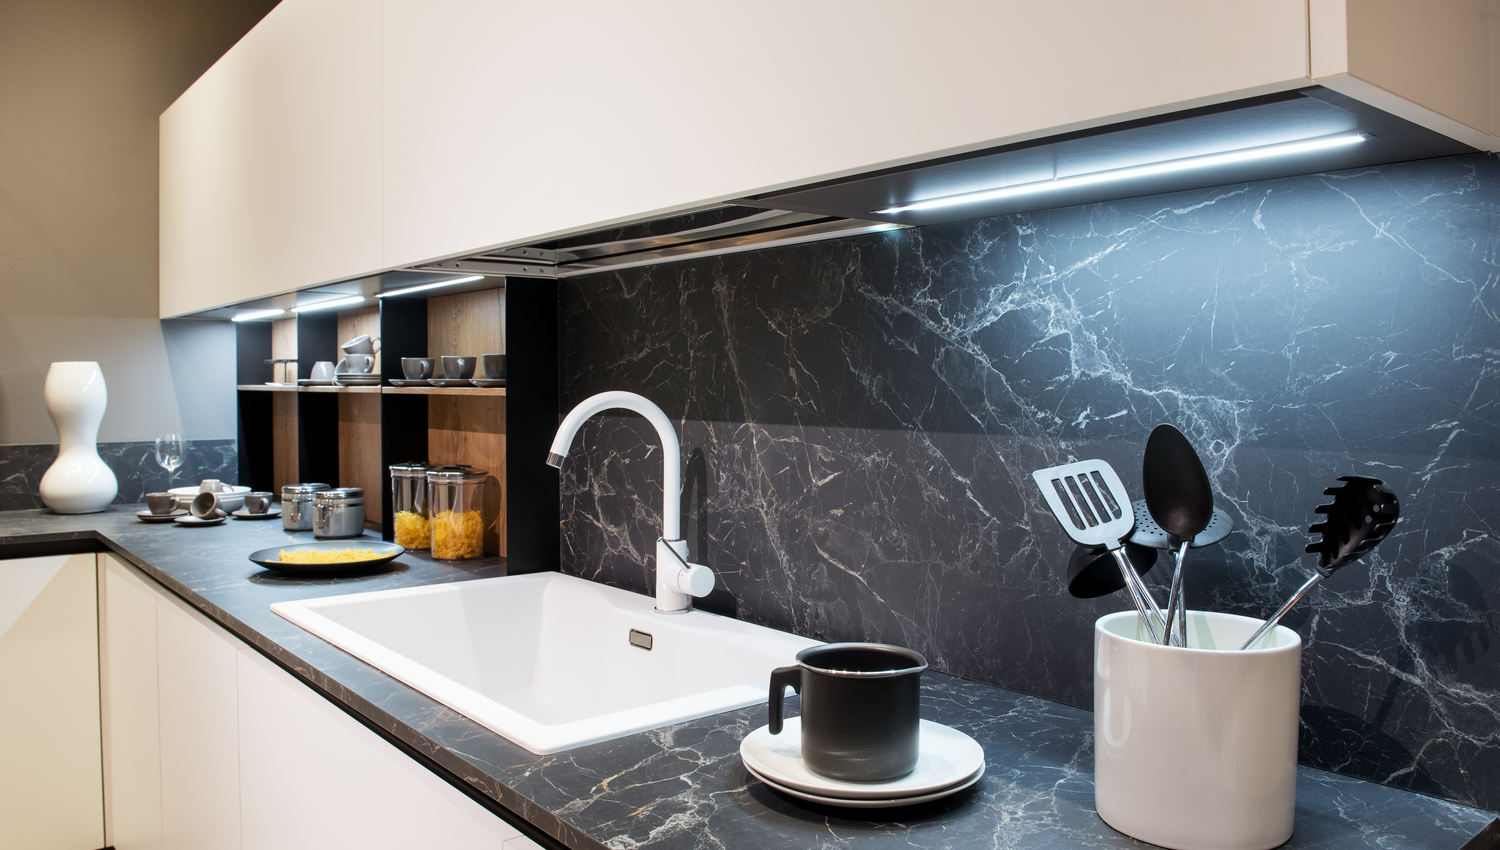 Bold,Backsplash, Marble,Effect,Kitchen,Counter,With,Utensils,And,A,White,Rectangular